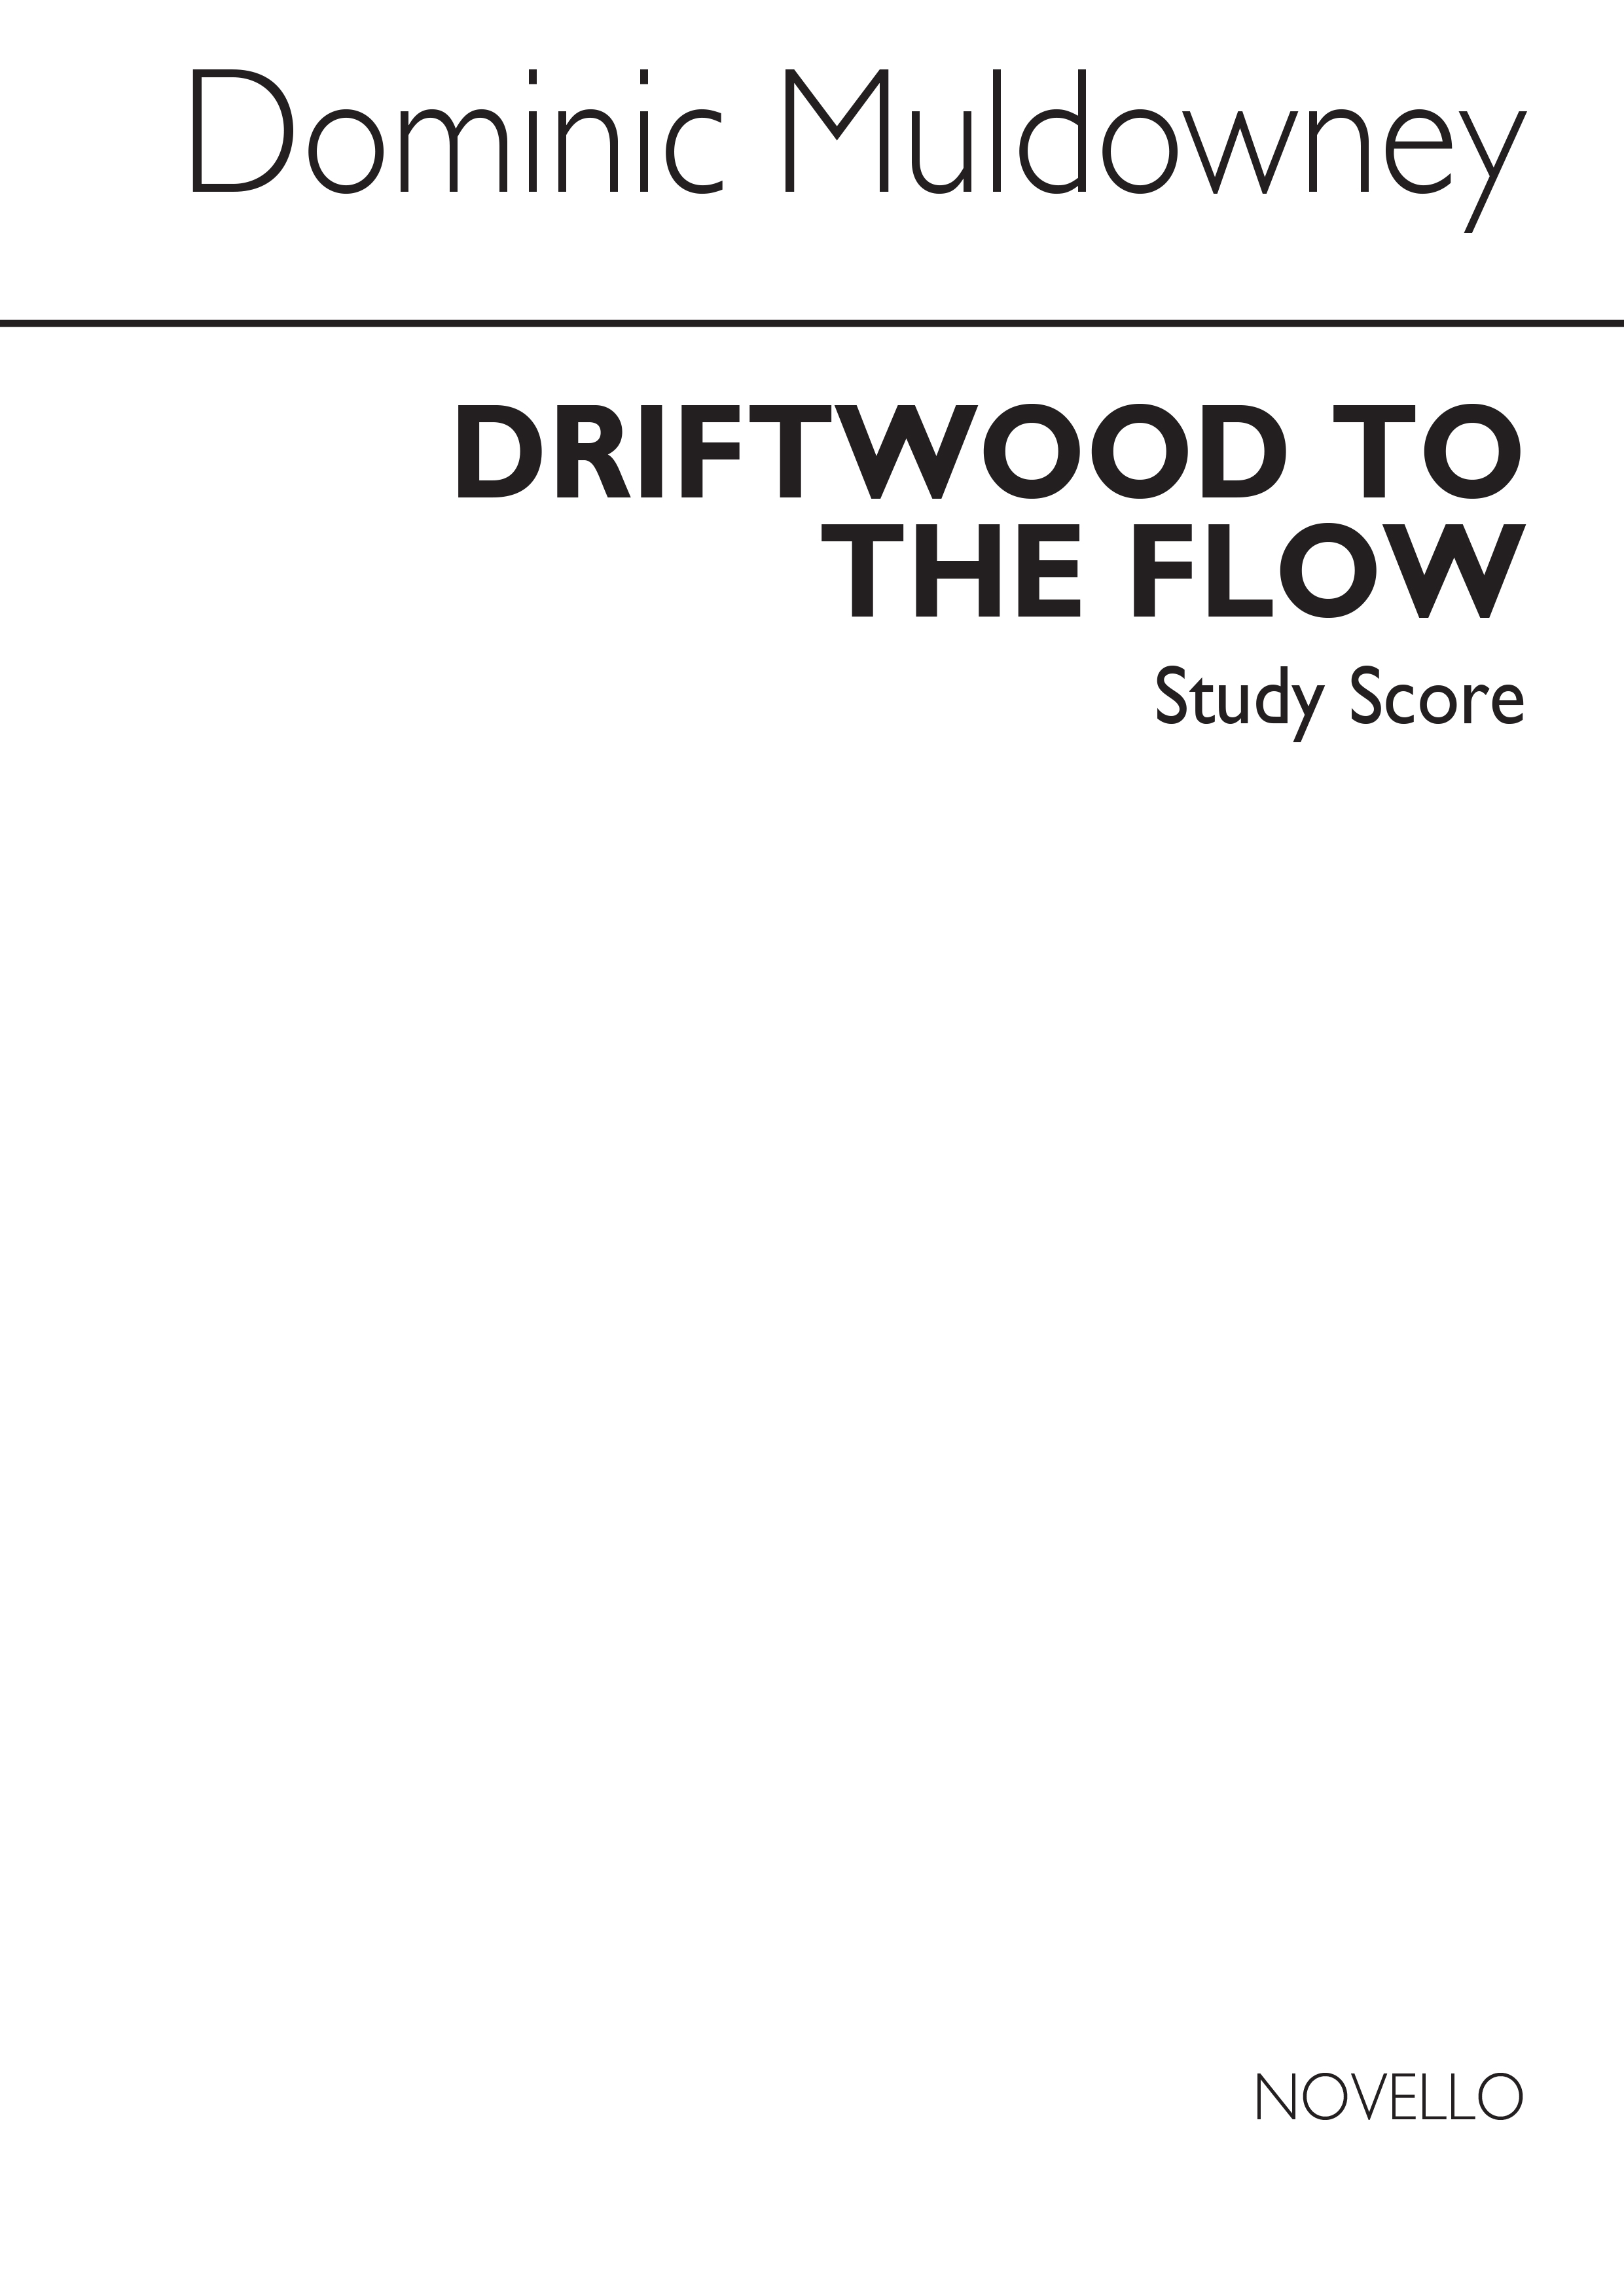 Muldowney: Driftwood To The Flow (Study Score)